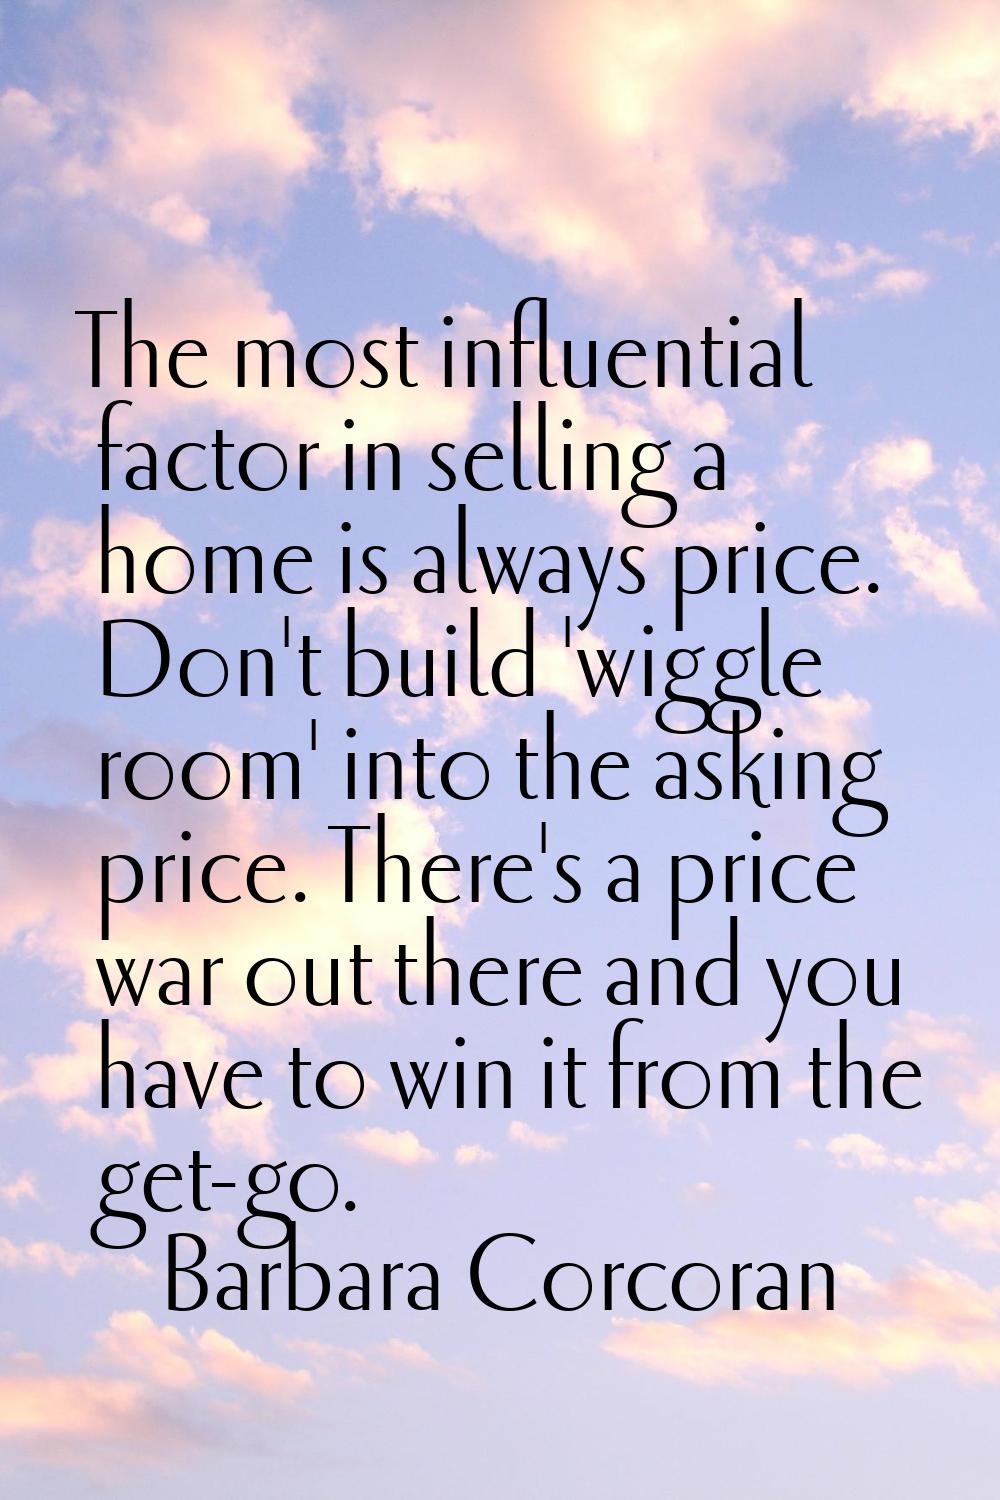 The most influential factor in selling a home is always price. Don't build 'wiggle room' into the a